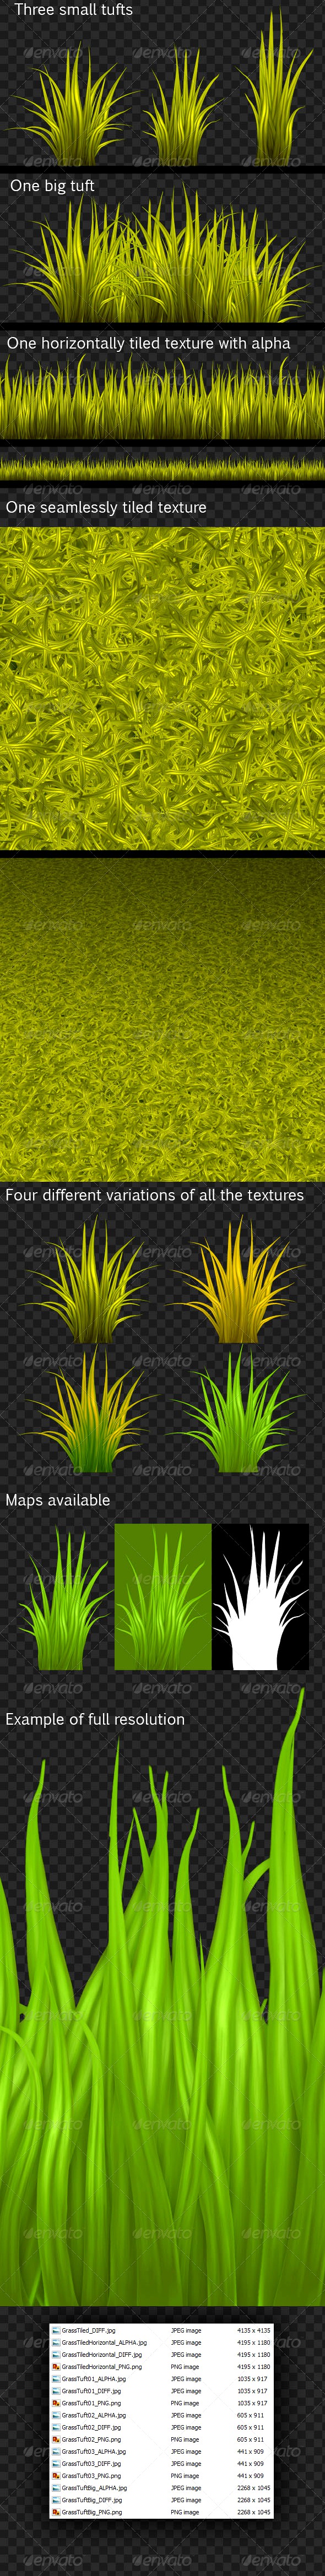 HQ Pack of Painted Grass Textures